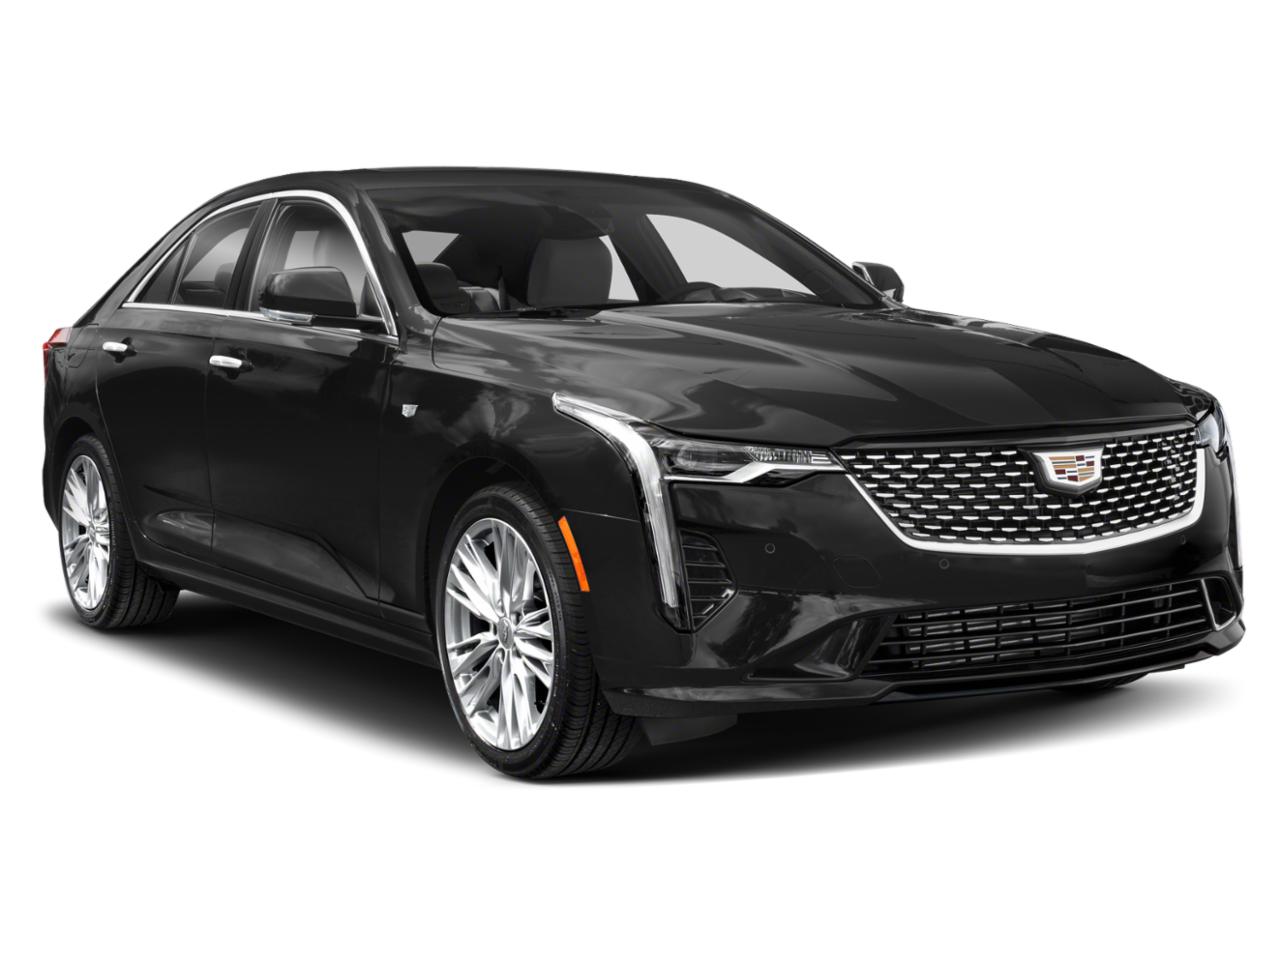 Find a New 2020 Garnet Metallic Cadillac CT4 Vehicle For Sale in